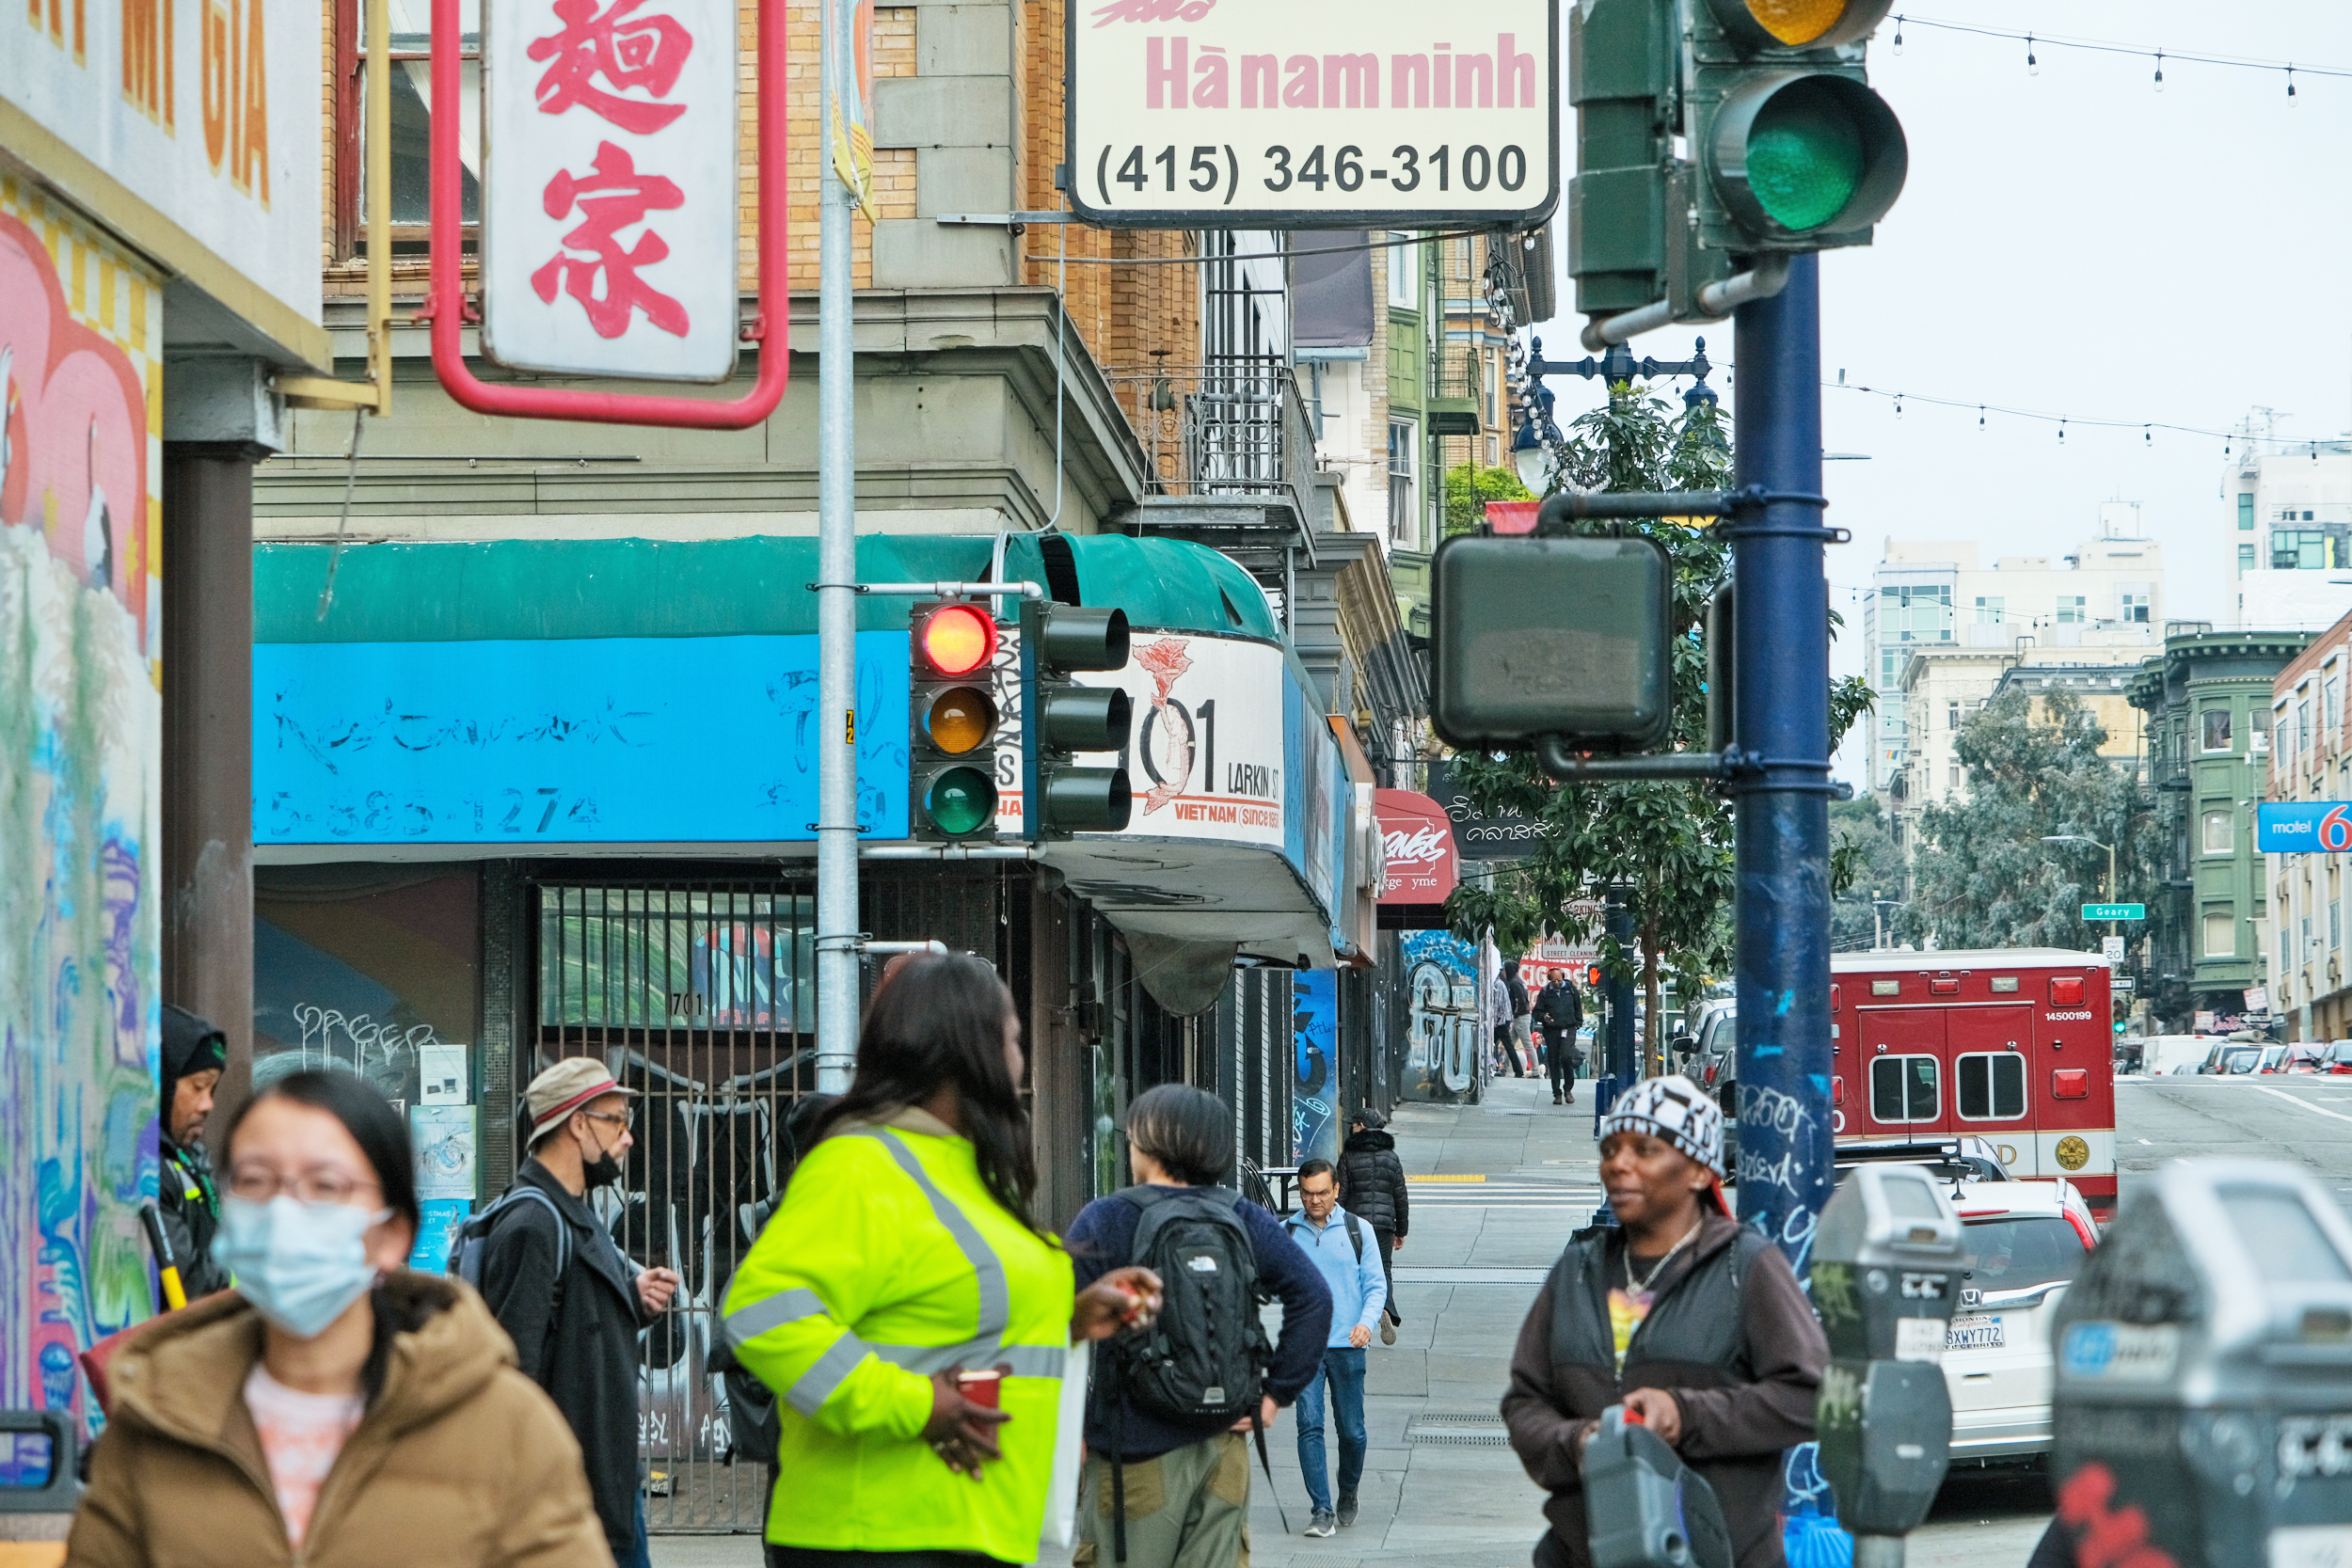 City street scene with pedestrians, traffic lights, Asian signage, and a Larkin Street sign.